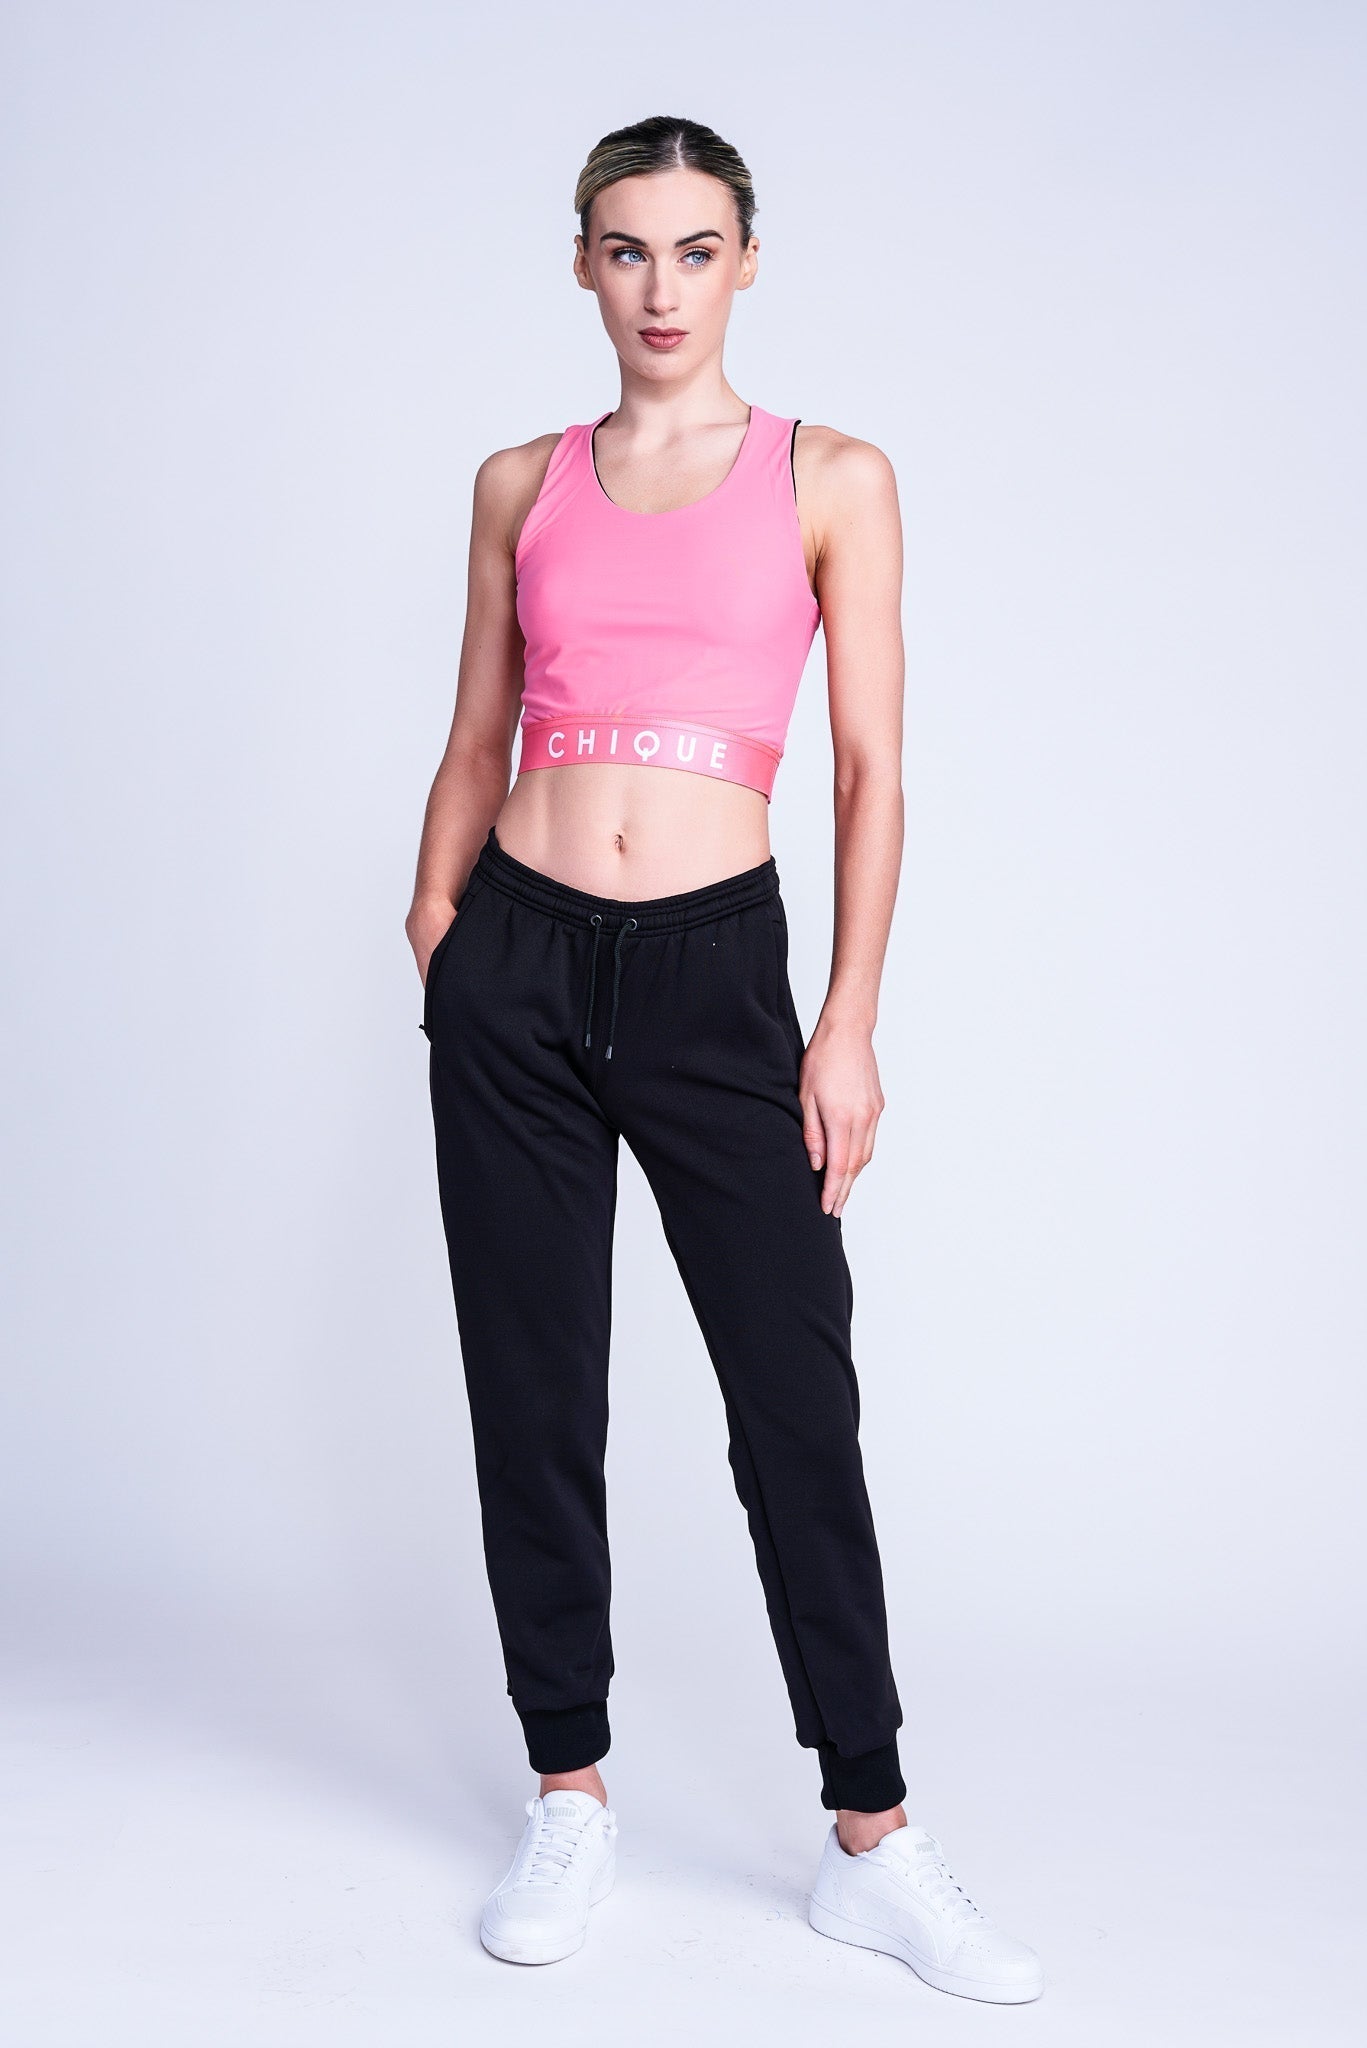 Sleeveless Sports Crop Top AT-5 – SOIE Woman